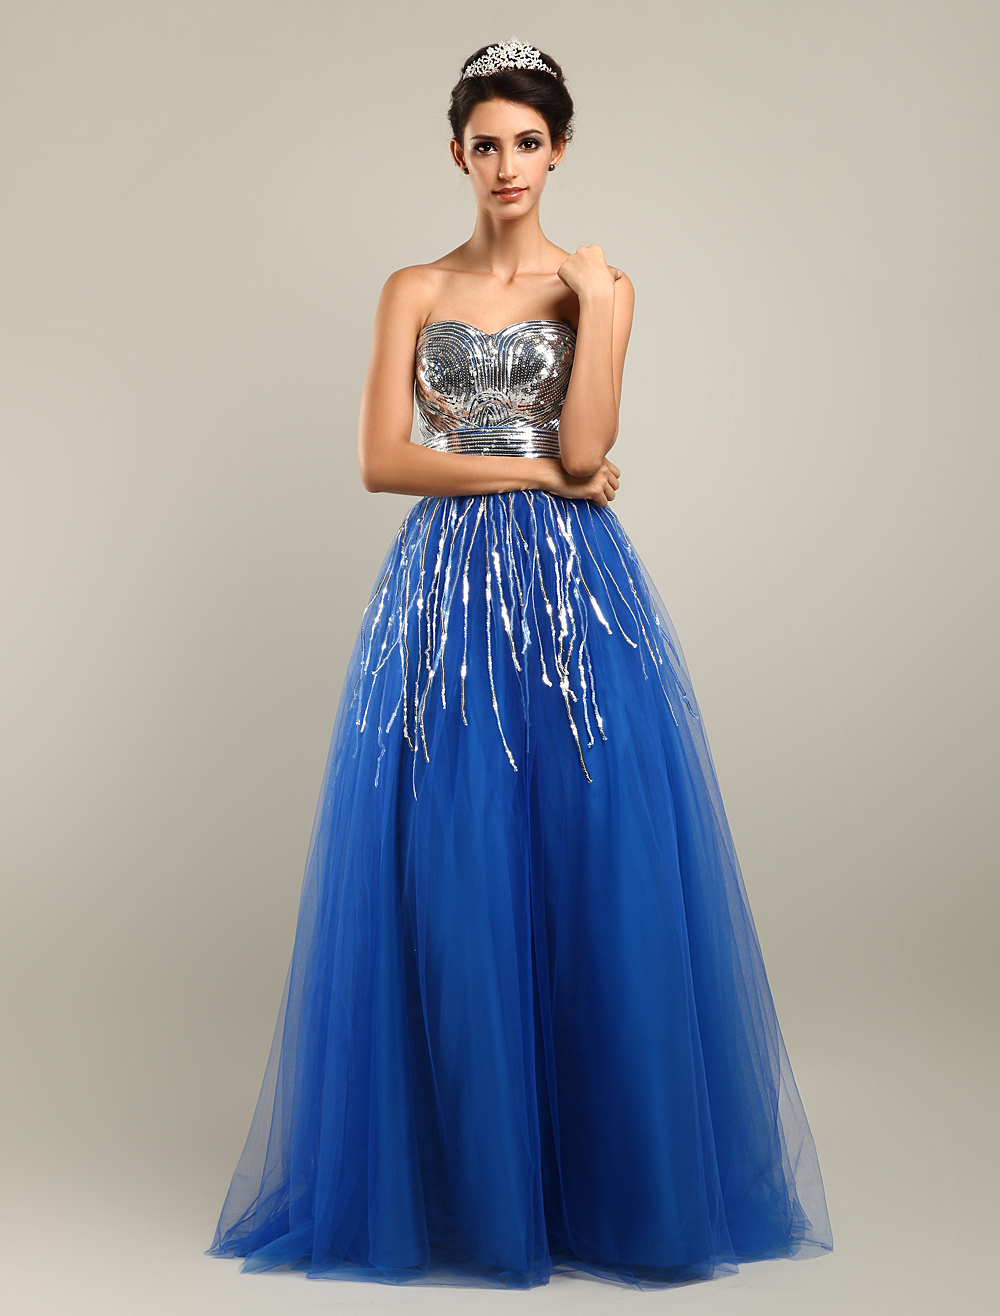 Royal Blue Long Homecoming Dress with Sequined Bodice - Milanoo.com